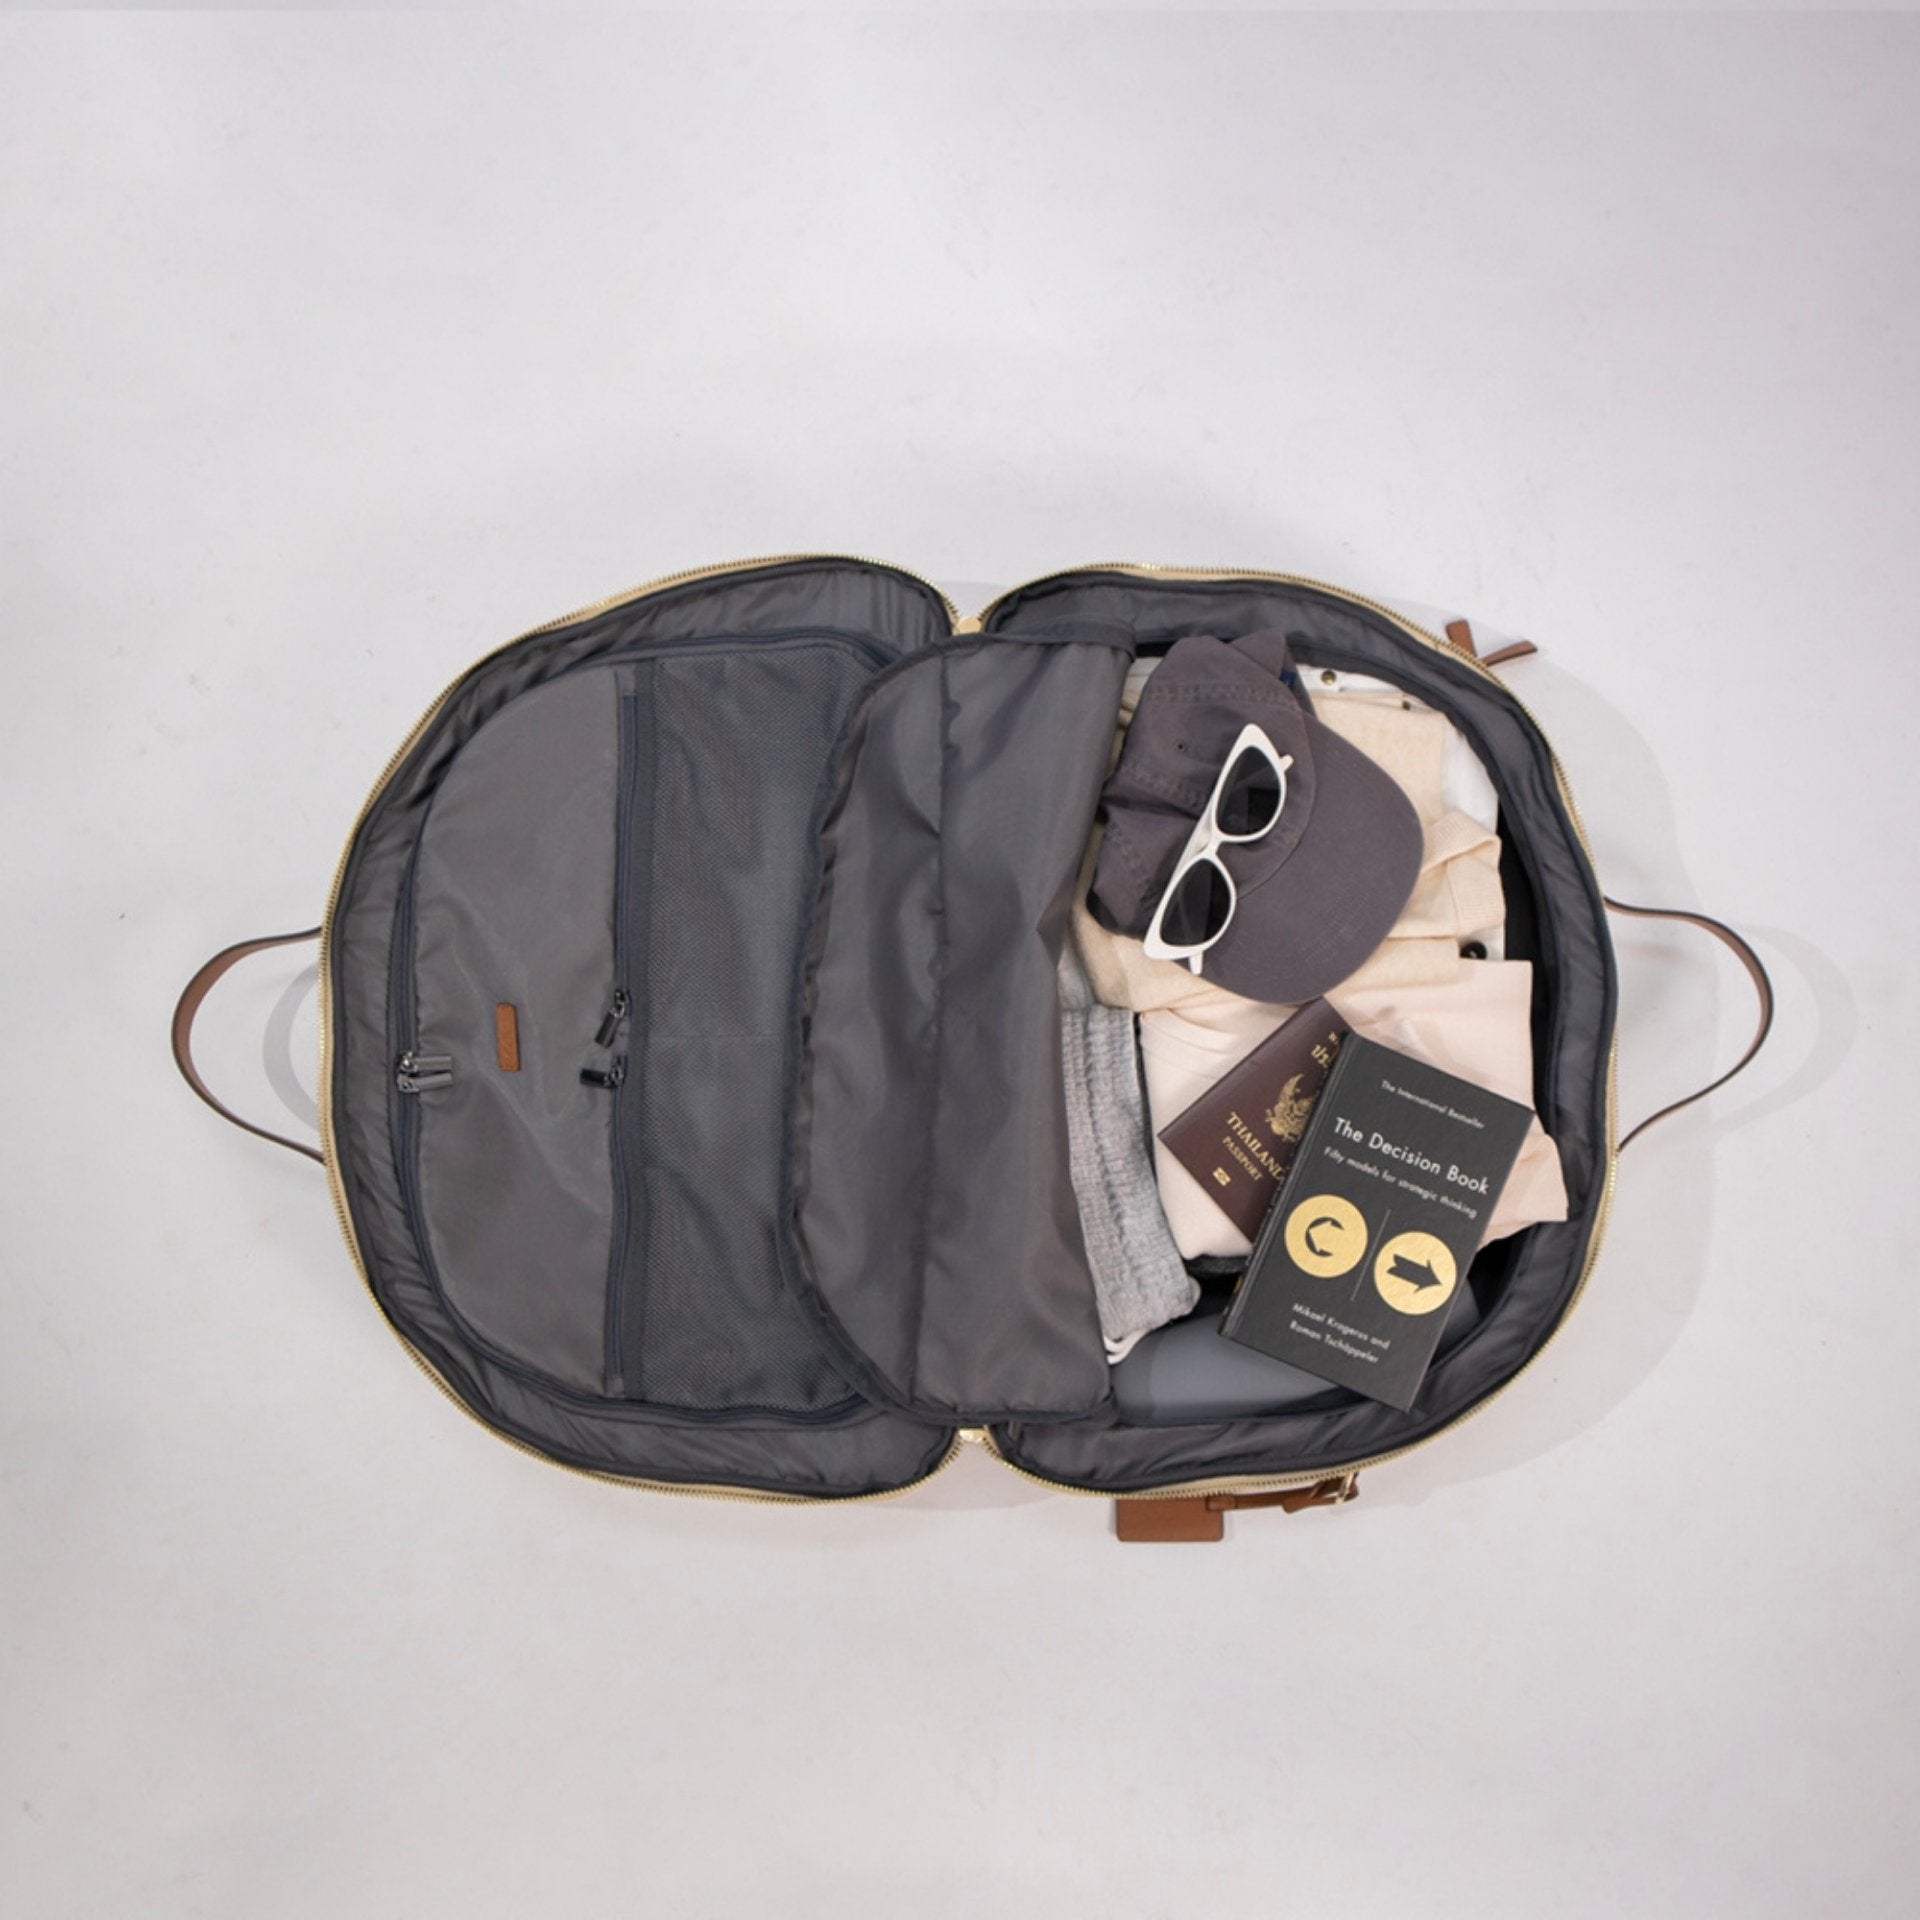 The Carry-All Travel Bag